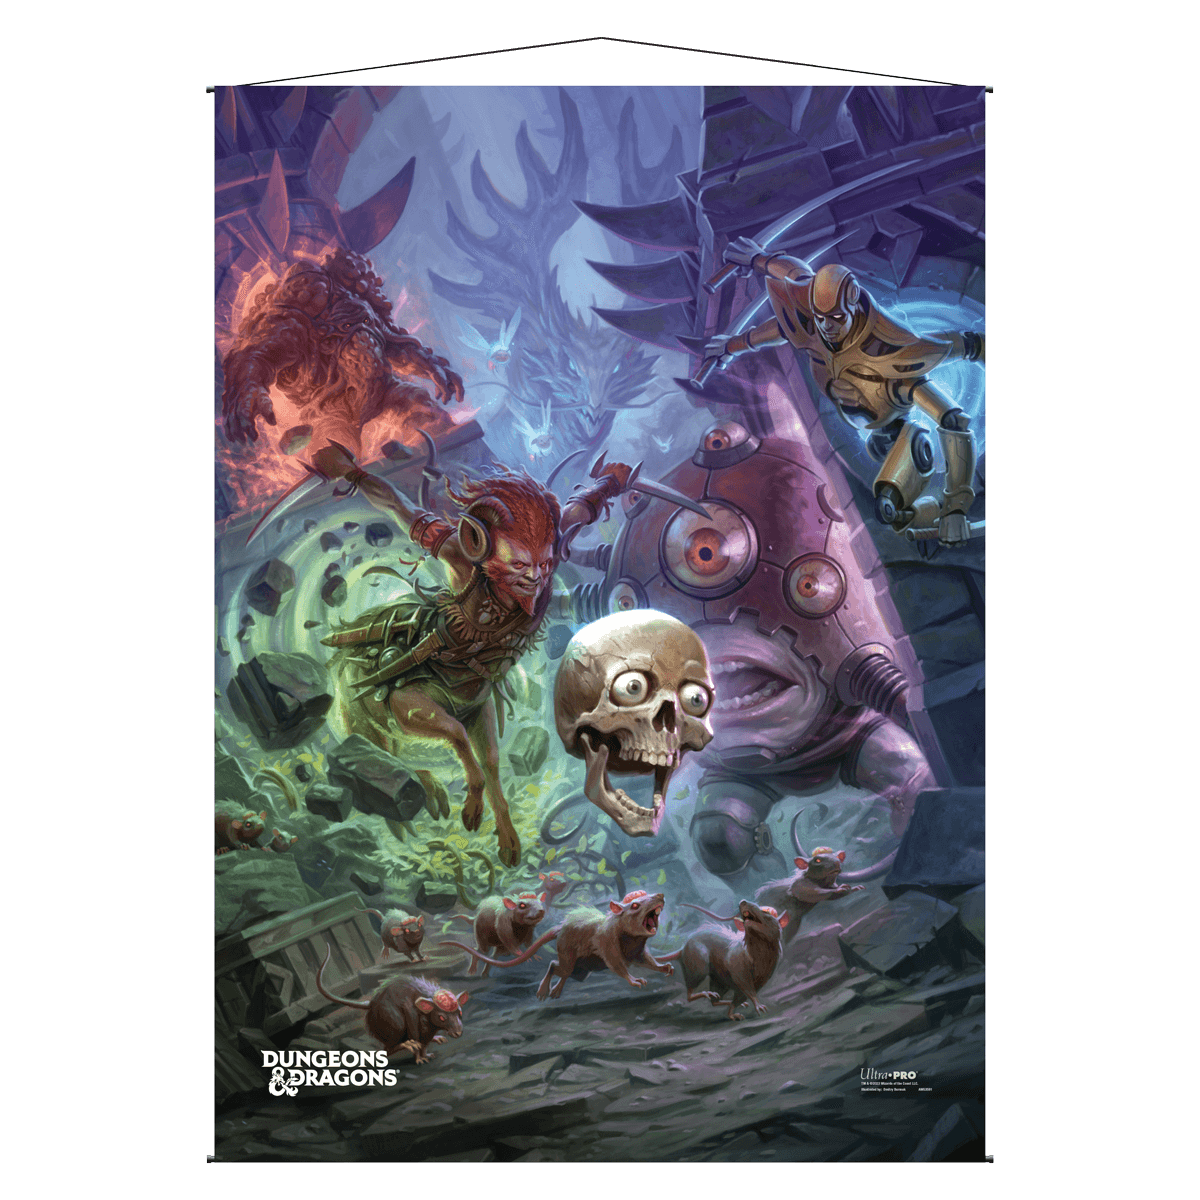 Planescape: Adventures in the Multiverse for Dungeons & Dragons Wall Scroll - Morte’s Planar Parade Standard Cover Artwork v2 | Ultra PRO International